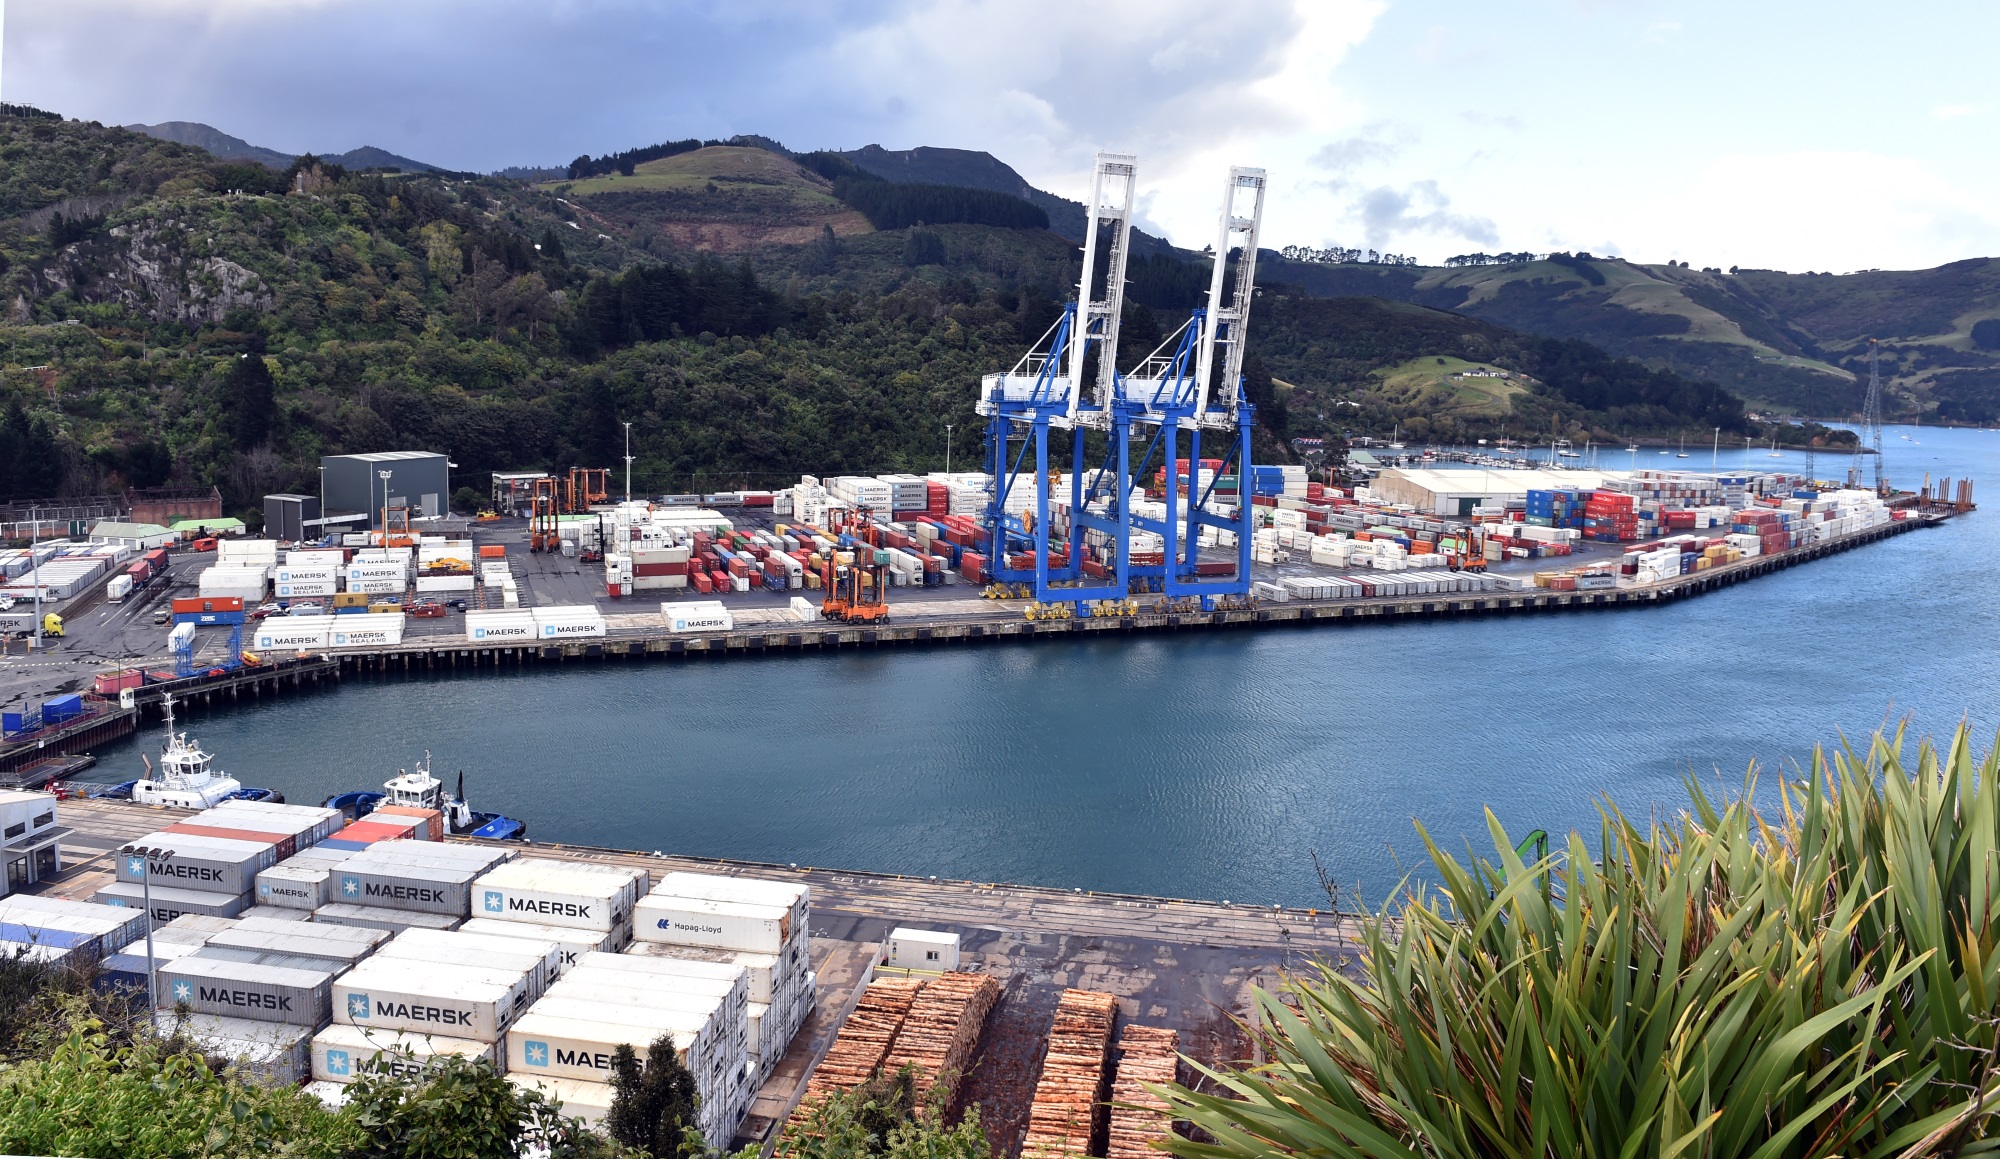 Port Chalmers container terminal, where a man was injured on Monday evening. PHOTO: PETER MCINTOSH